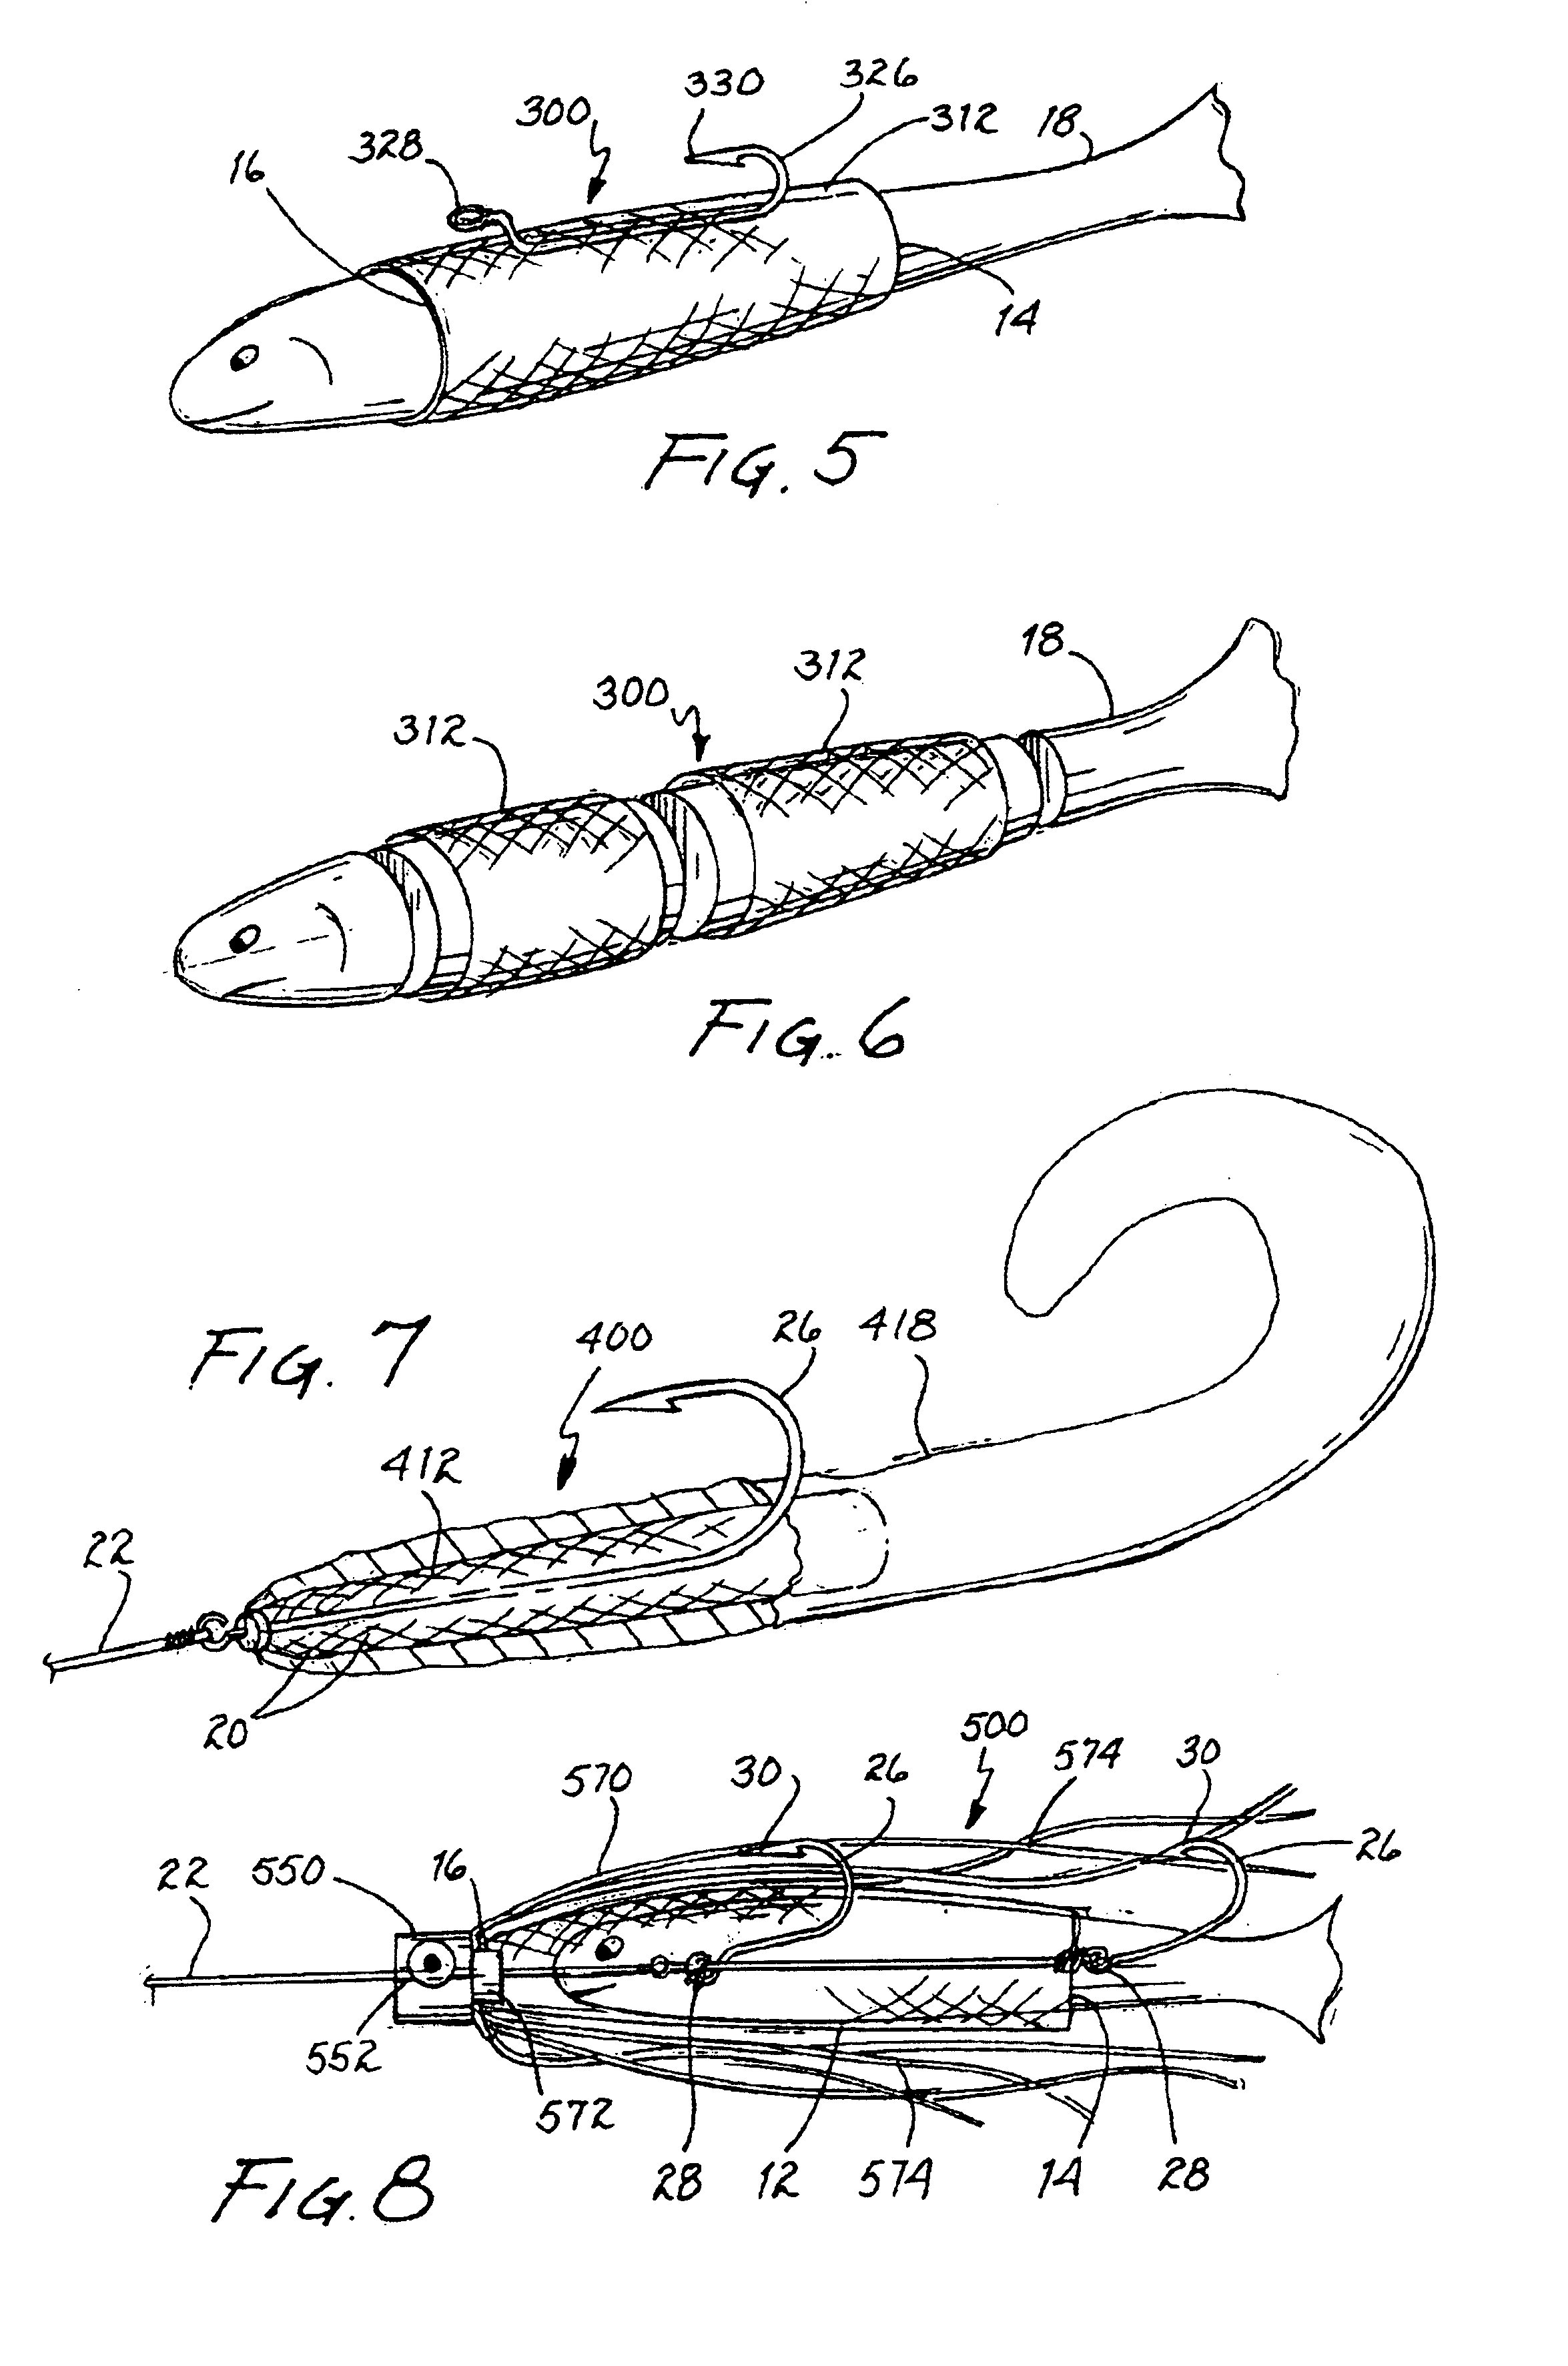 Expandable bait sleeve and method therefor